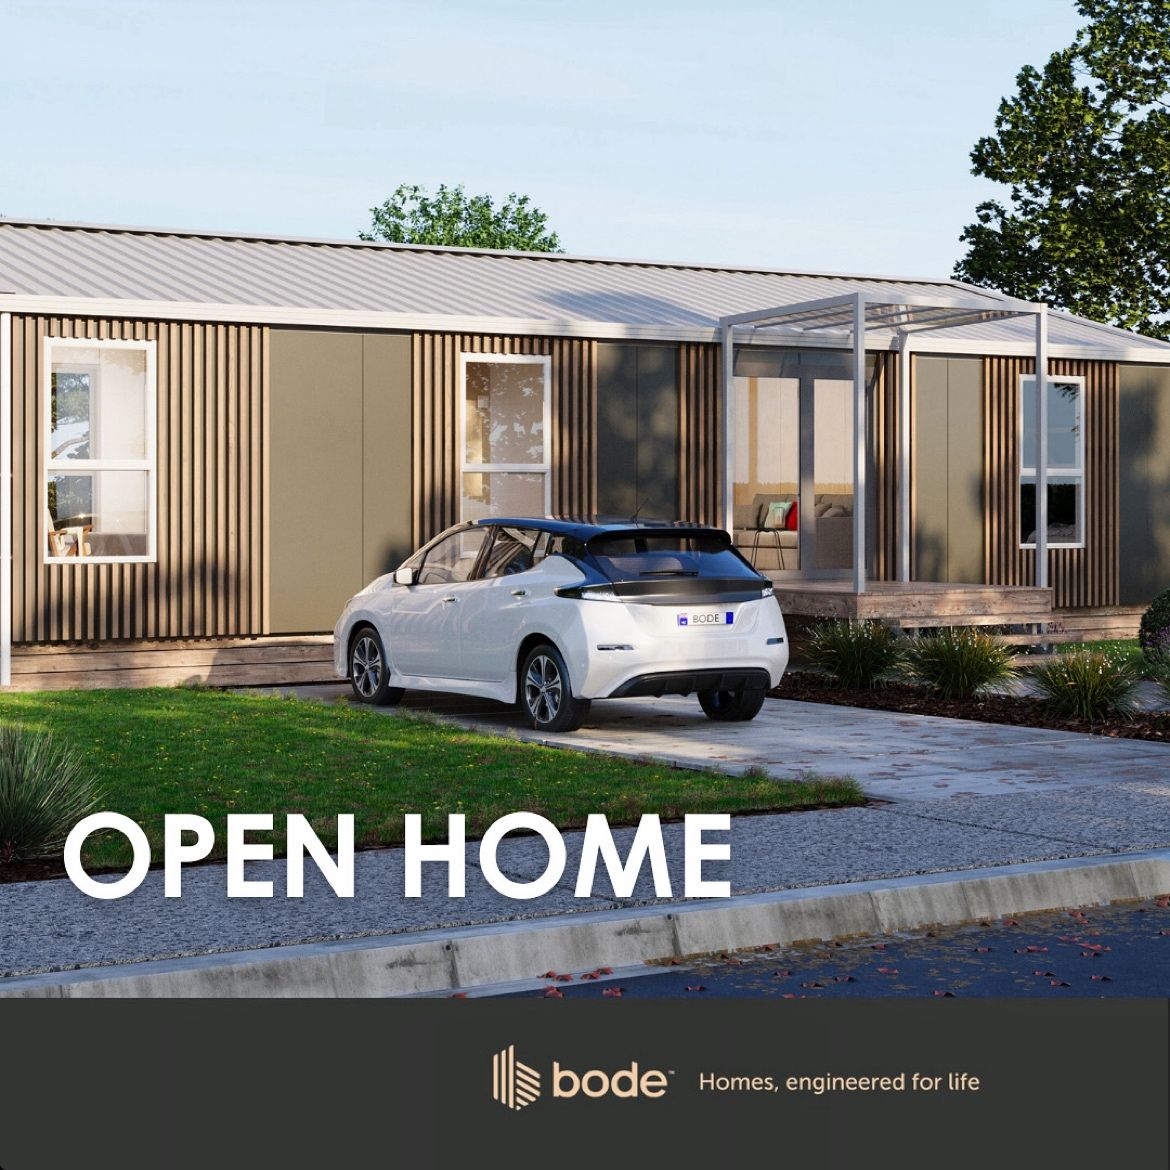 bode nz on LinkedIn: Come and experience the Bode difference for ...